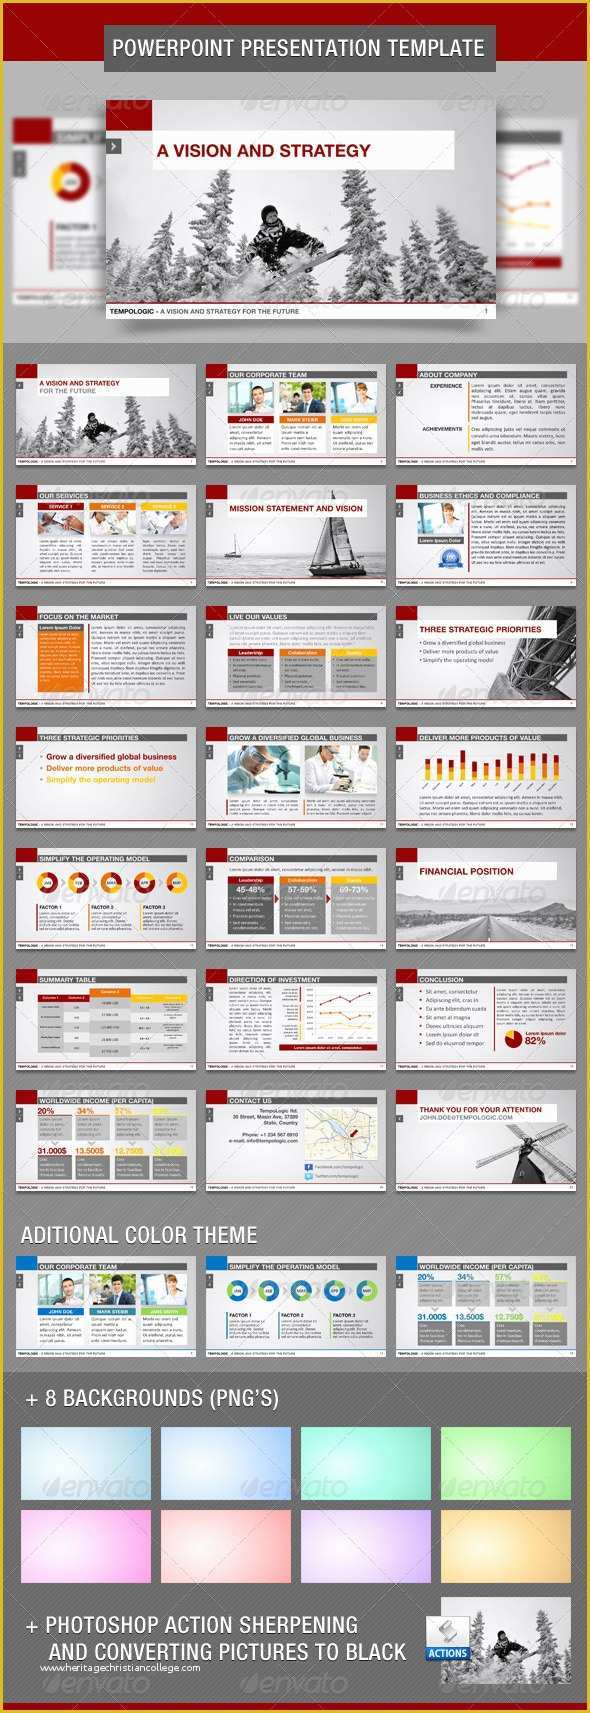 Powerpoint Templates Free Download 2007 Of Download Template Microsoft Powerpoint 2007 Free software